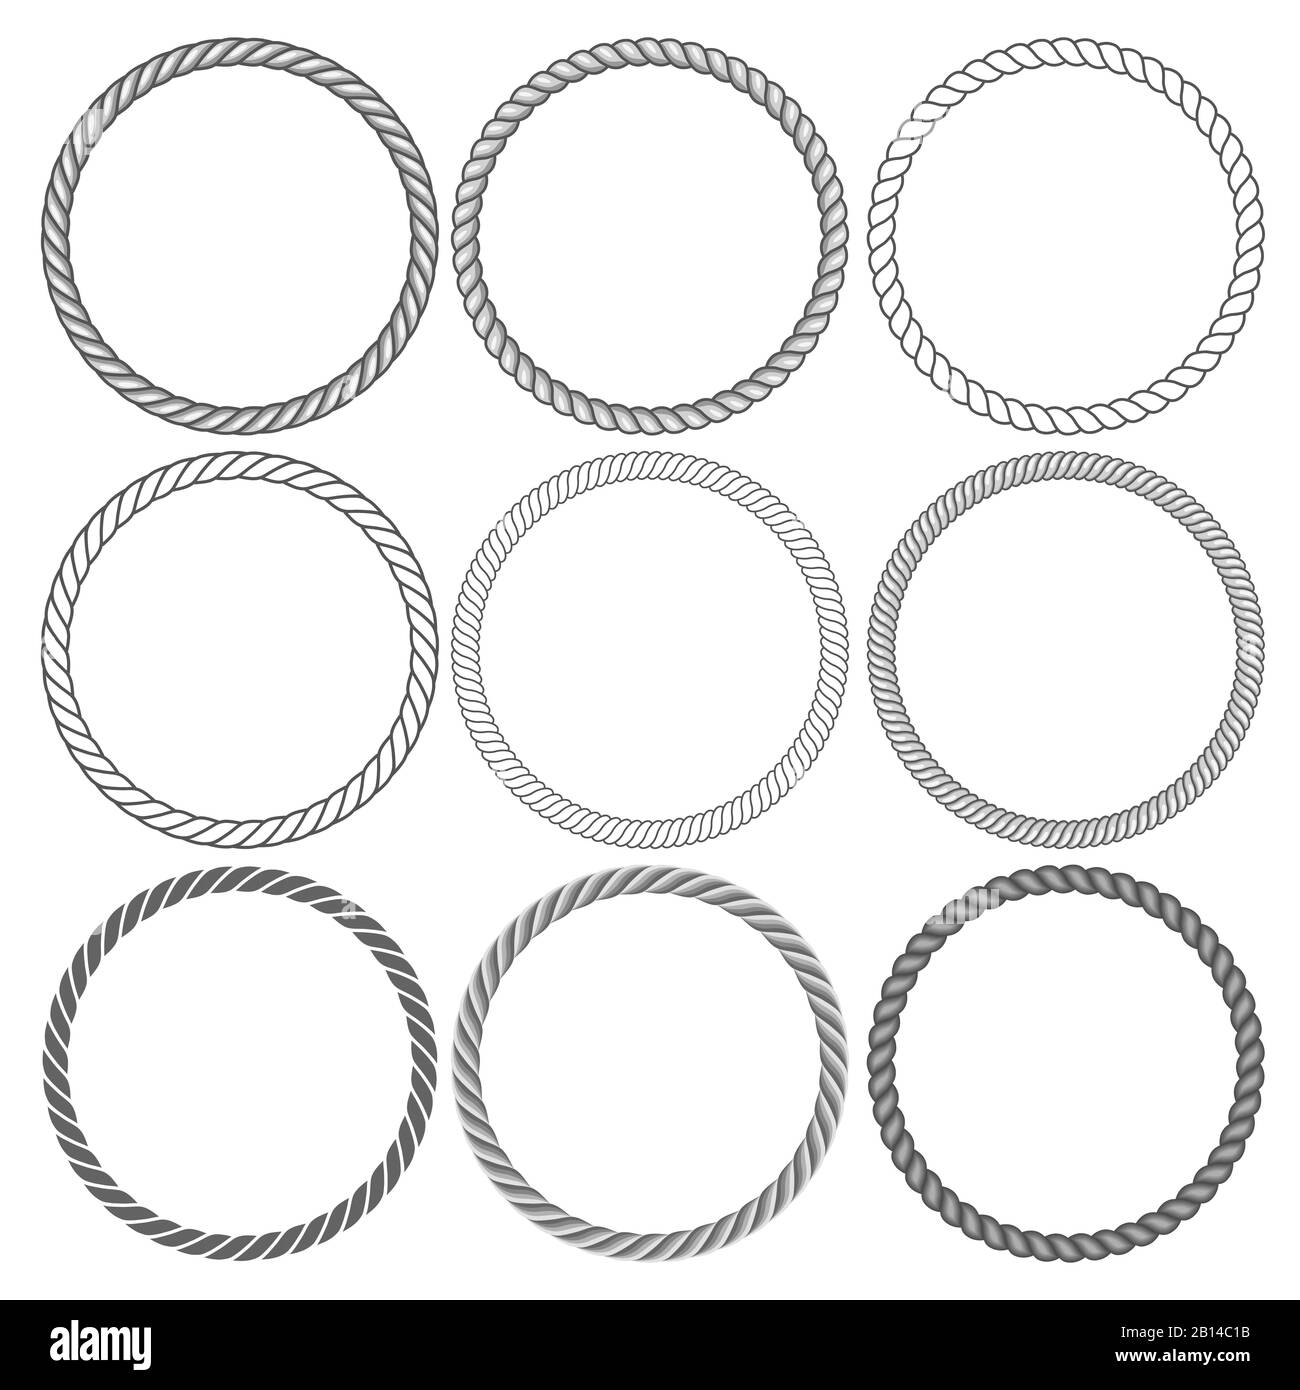 Round rope frames collection on white background. Collection of decorative rounds element. Vector illustration Stock Vector